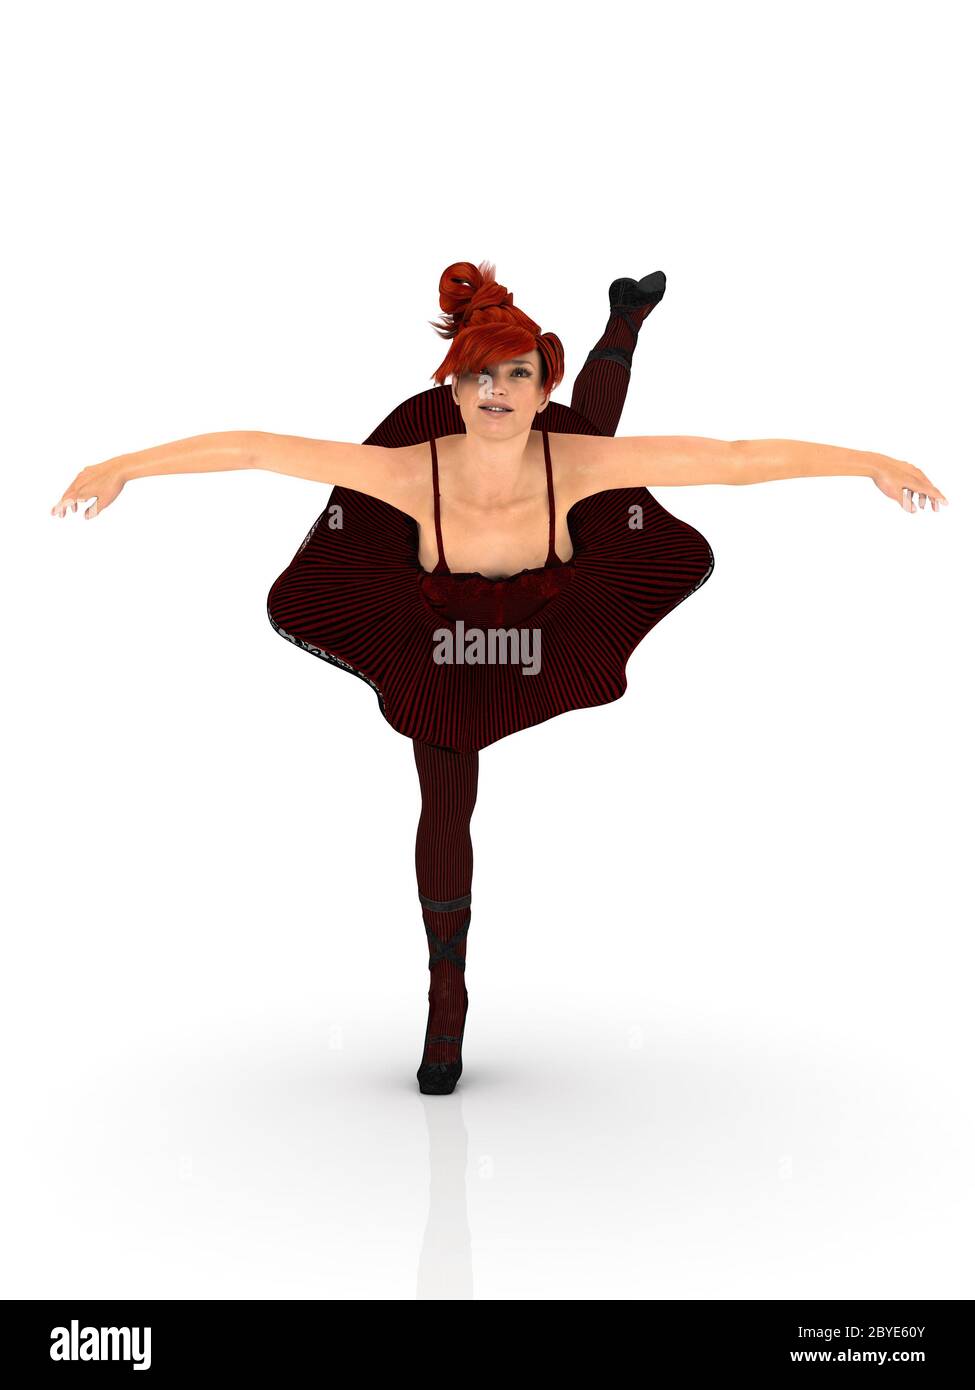 Page 3 - Ballett Dancer High Resolution Stock Photography and Images - Alamy